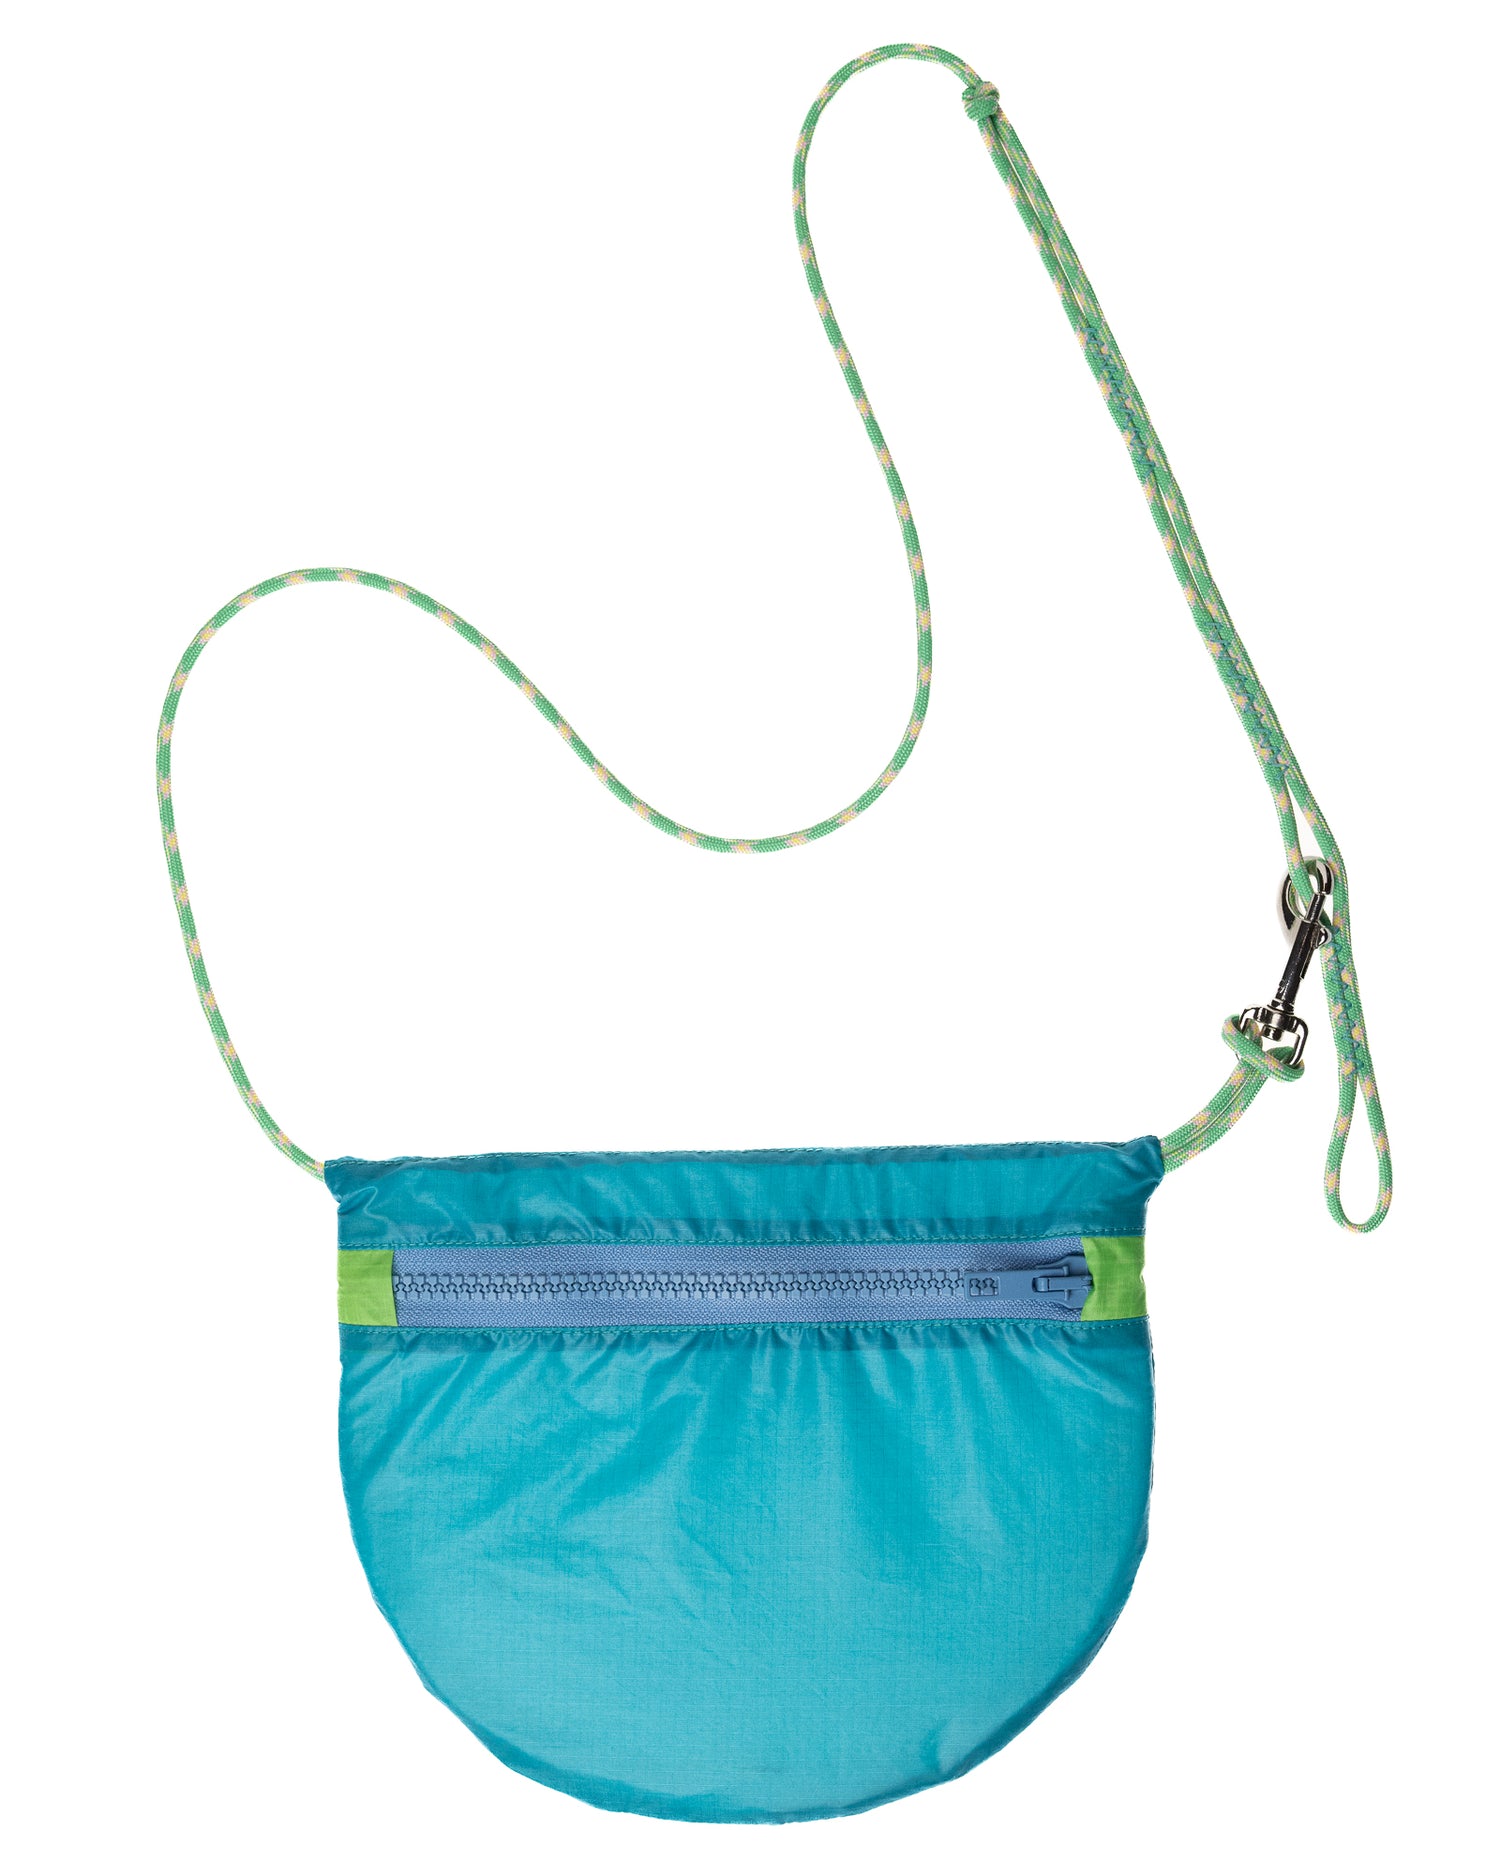 flat lay crossbody bag in turquoise and green made from recycled rip stop nylon